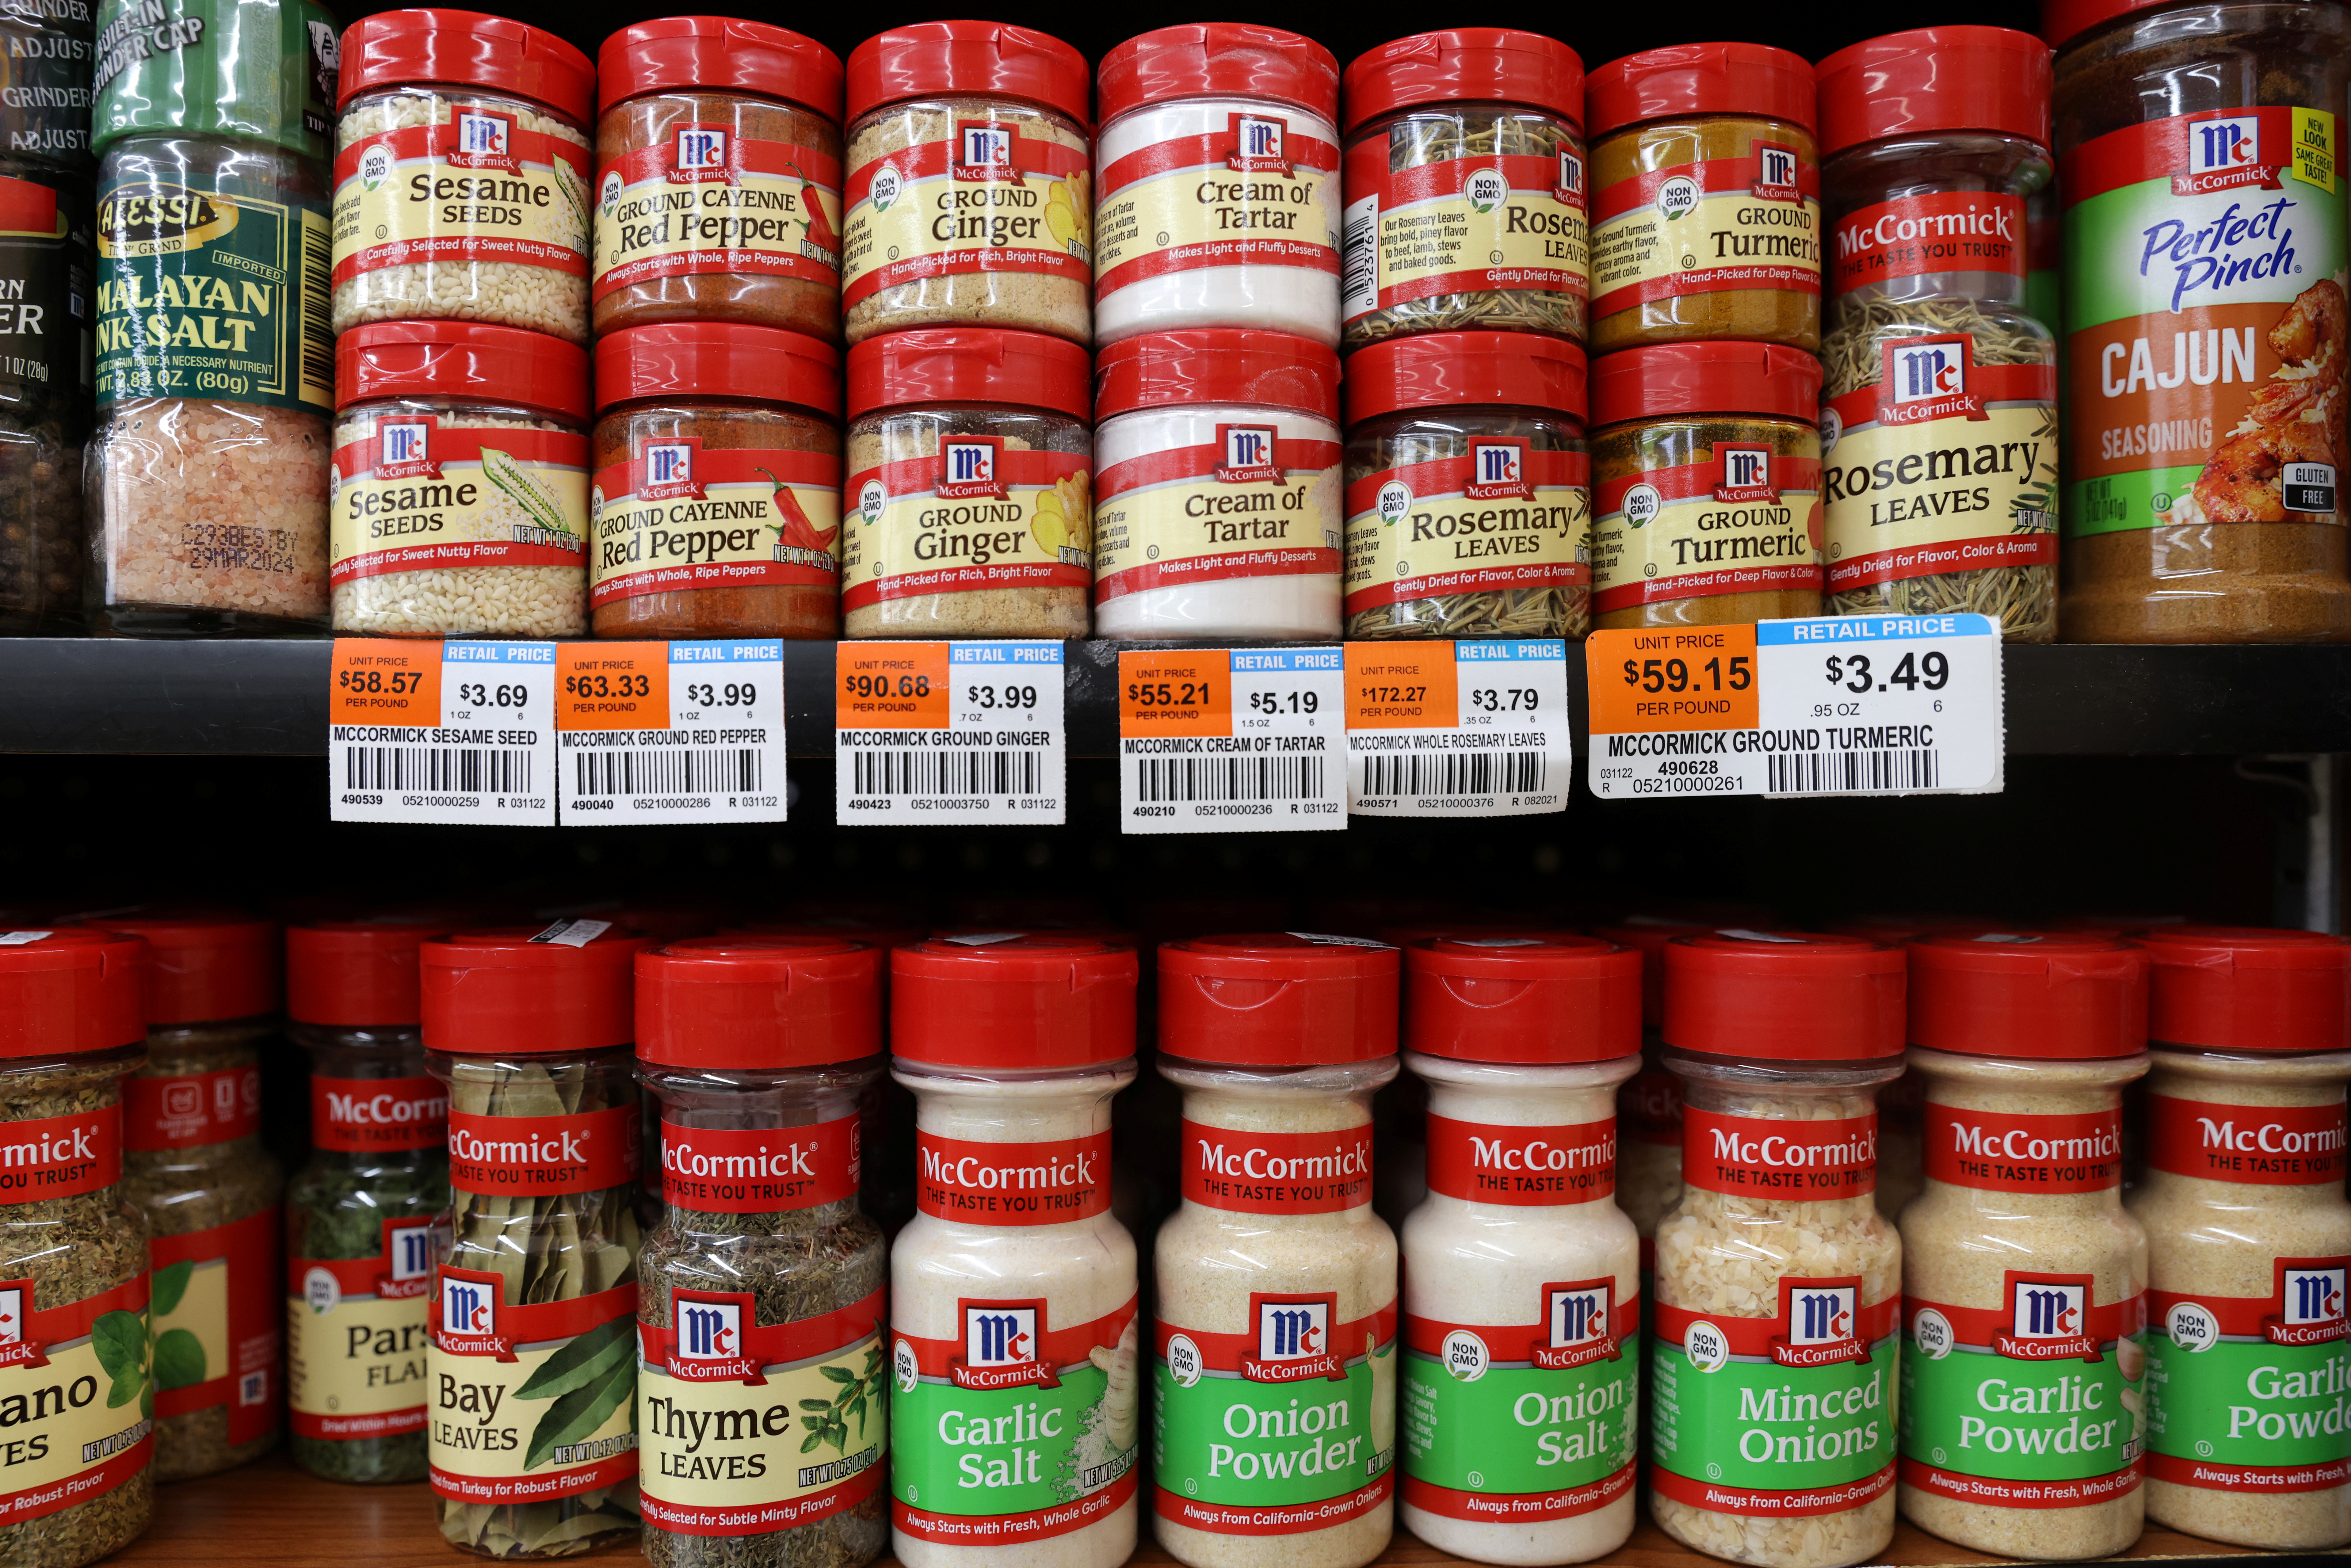 McCormick & Company spices are seen on display in a store in Manhattan, New York City